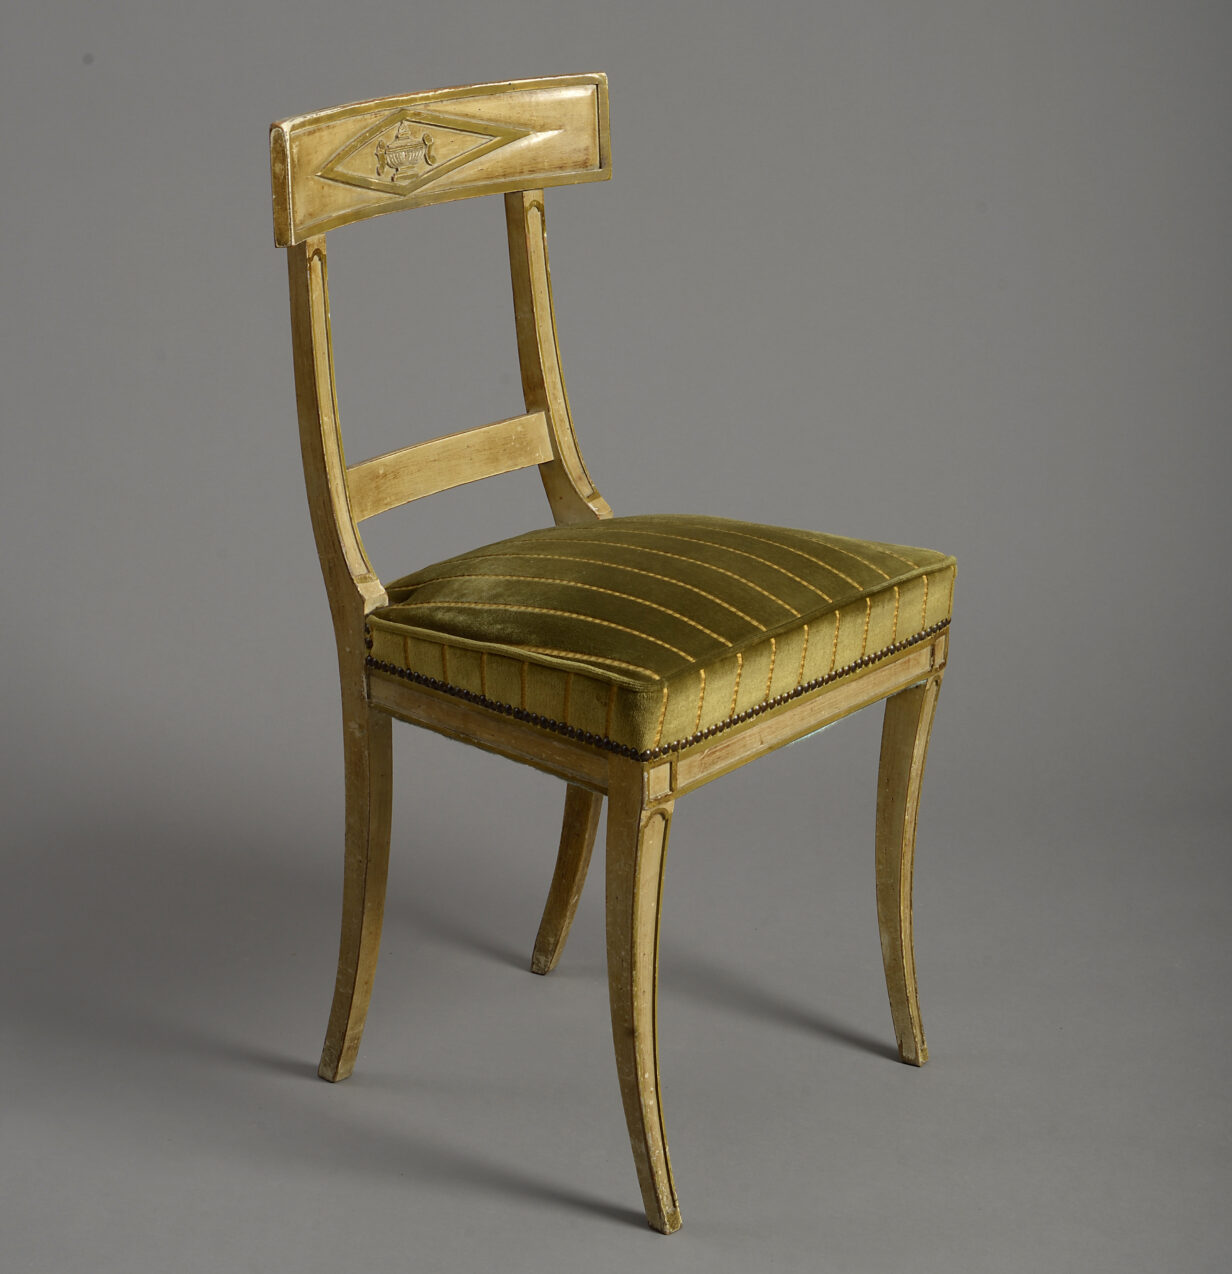 Early 19th century painted empire period side chair